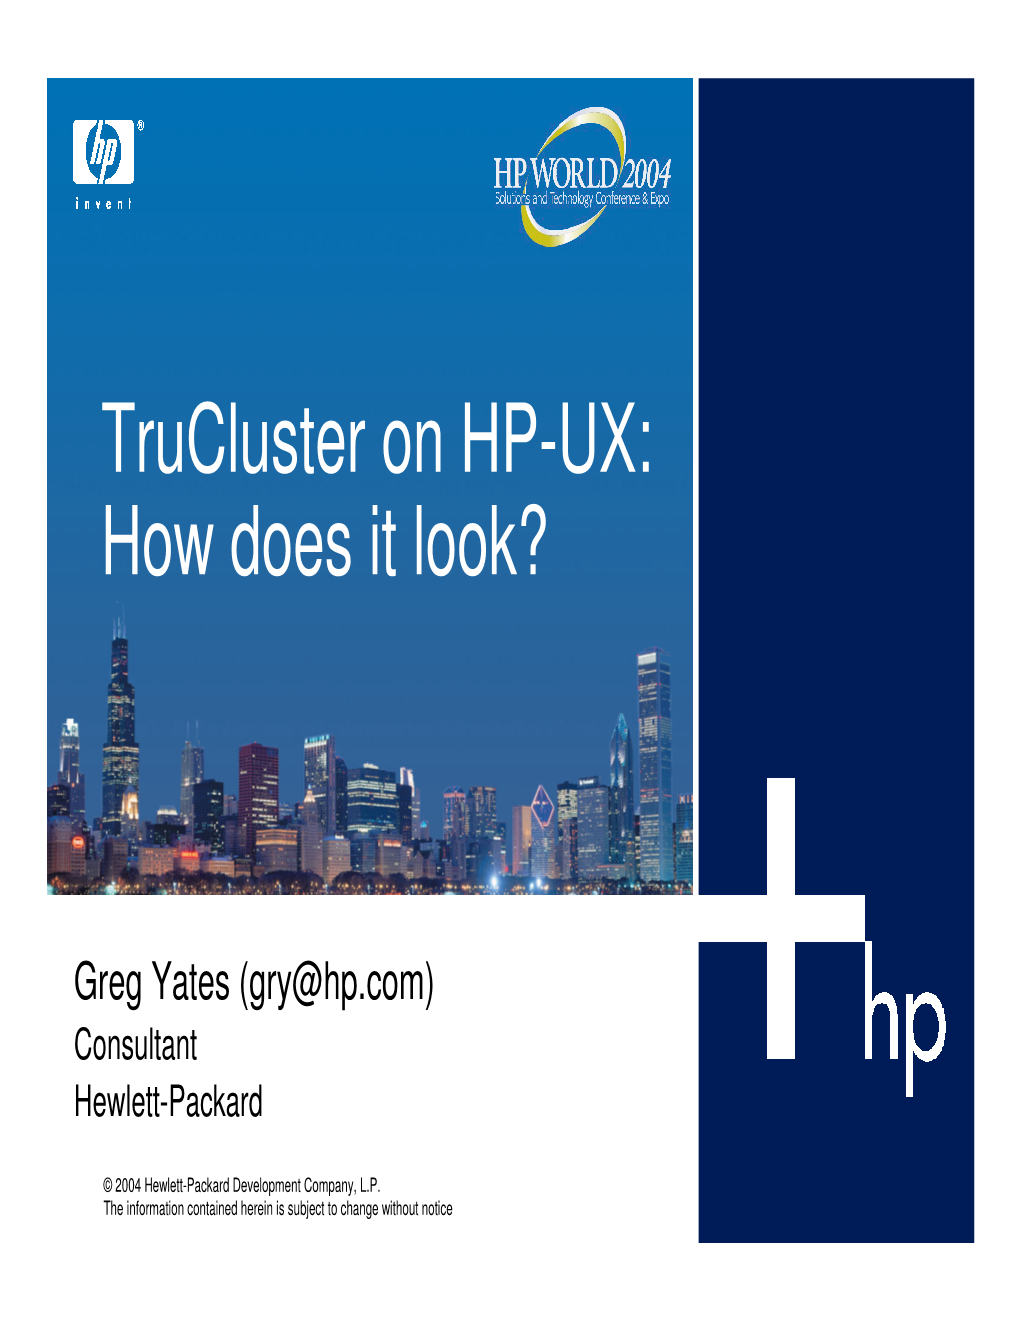 Trucluster on HP-UX: How Does It Look?